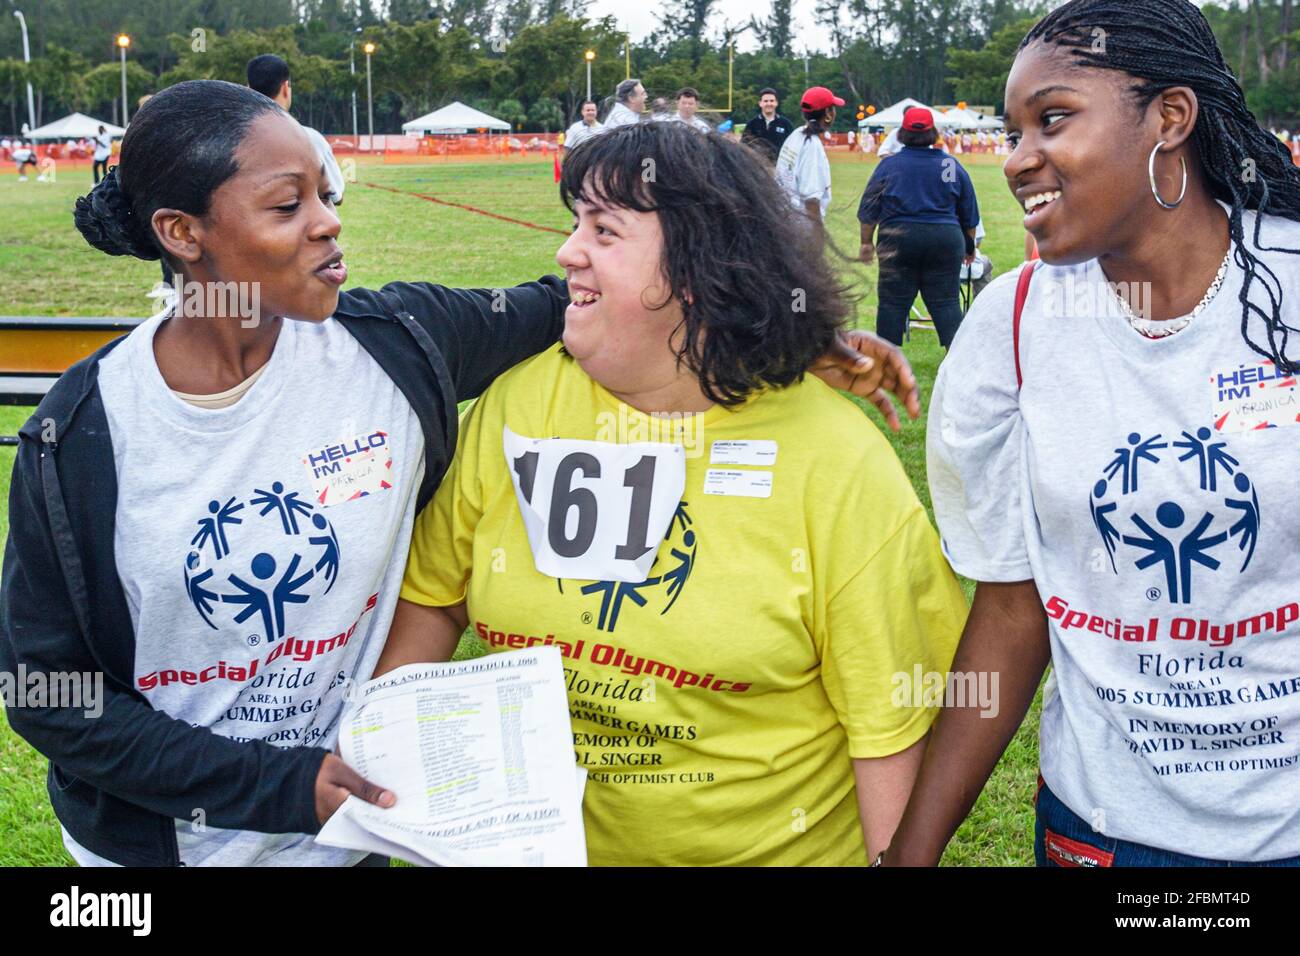 Florida North Miami FIU campus Special Olympics Summer Games,mentally disabled adult volunteer coach Black woman female women students, Stock Photo